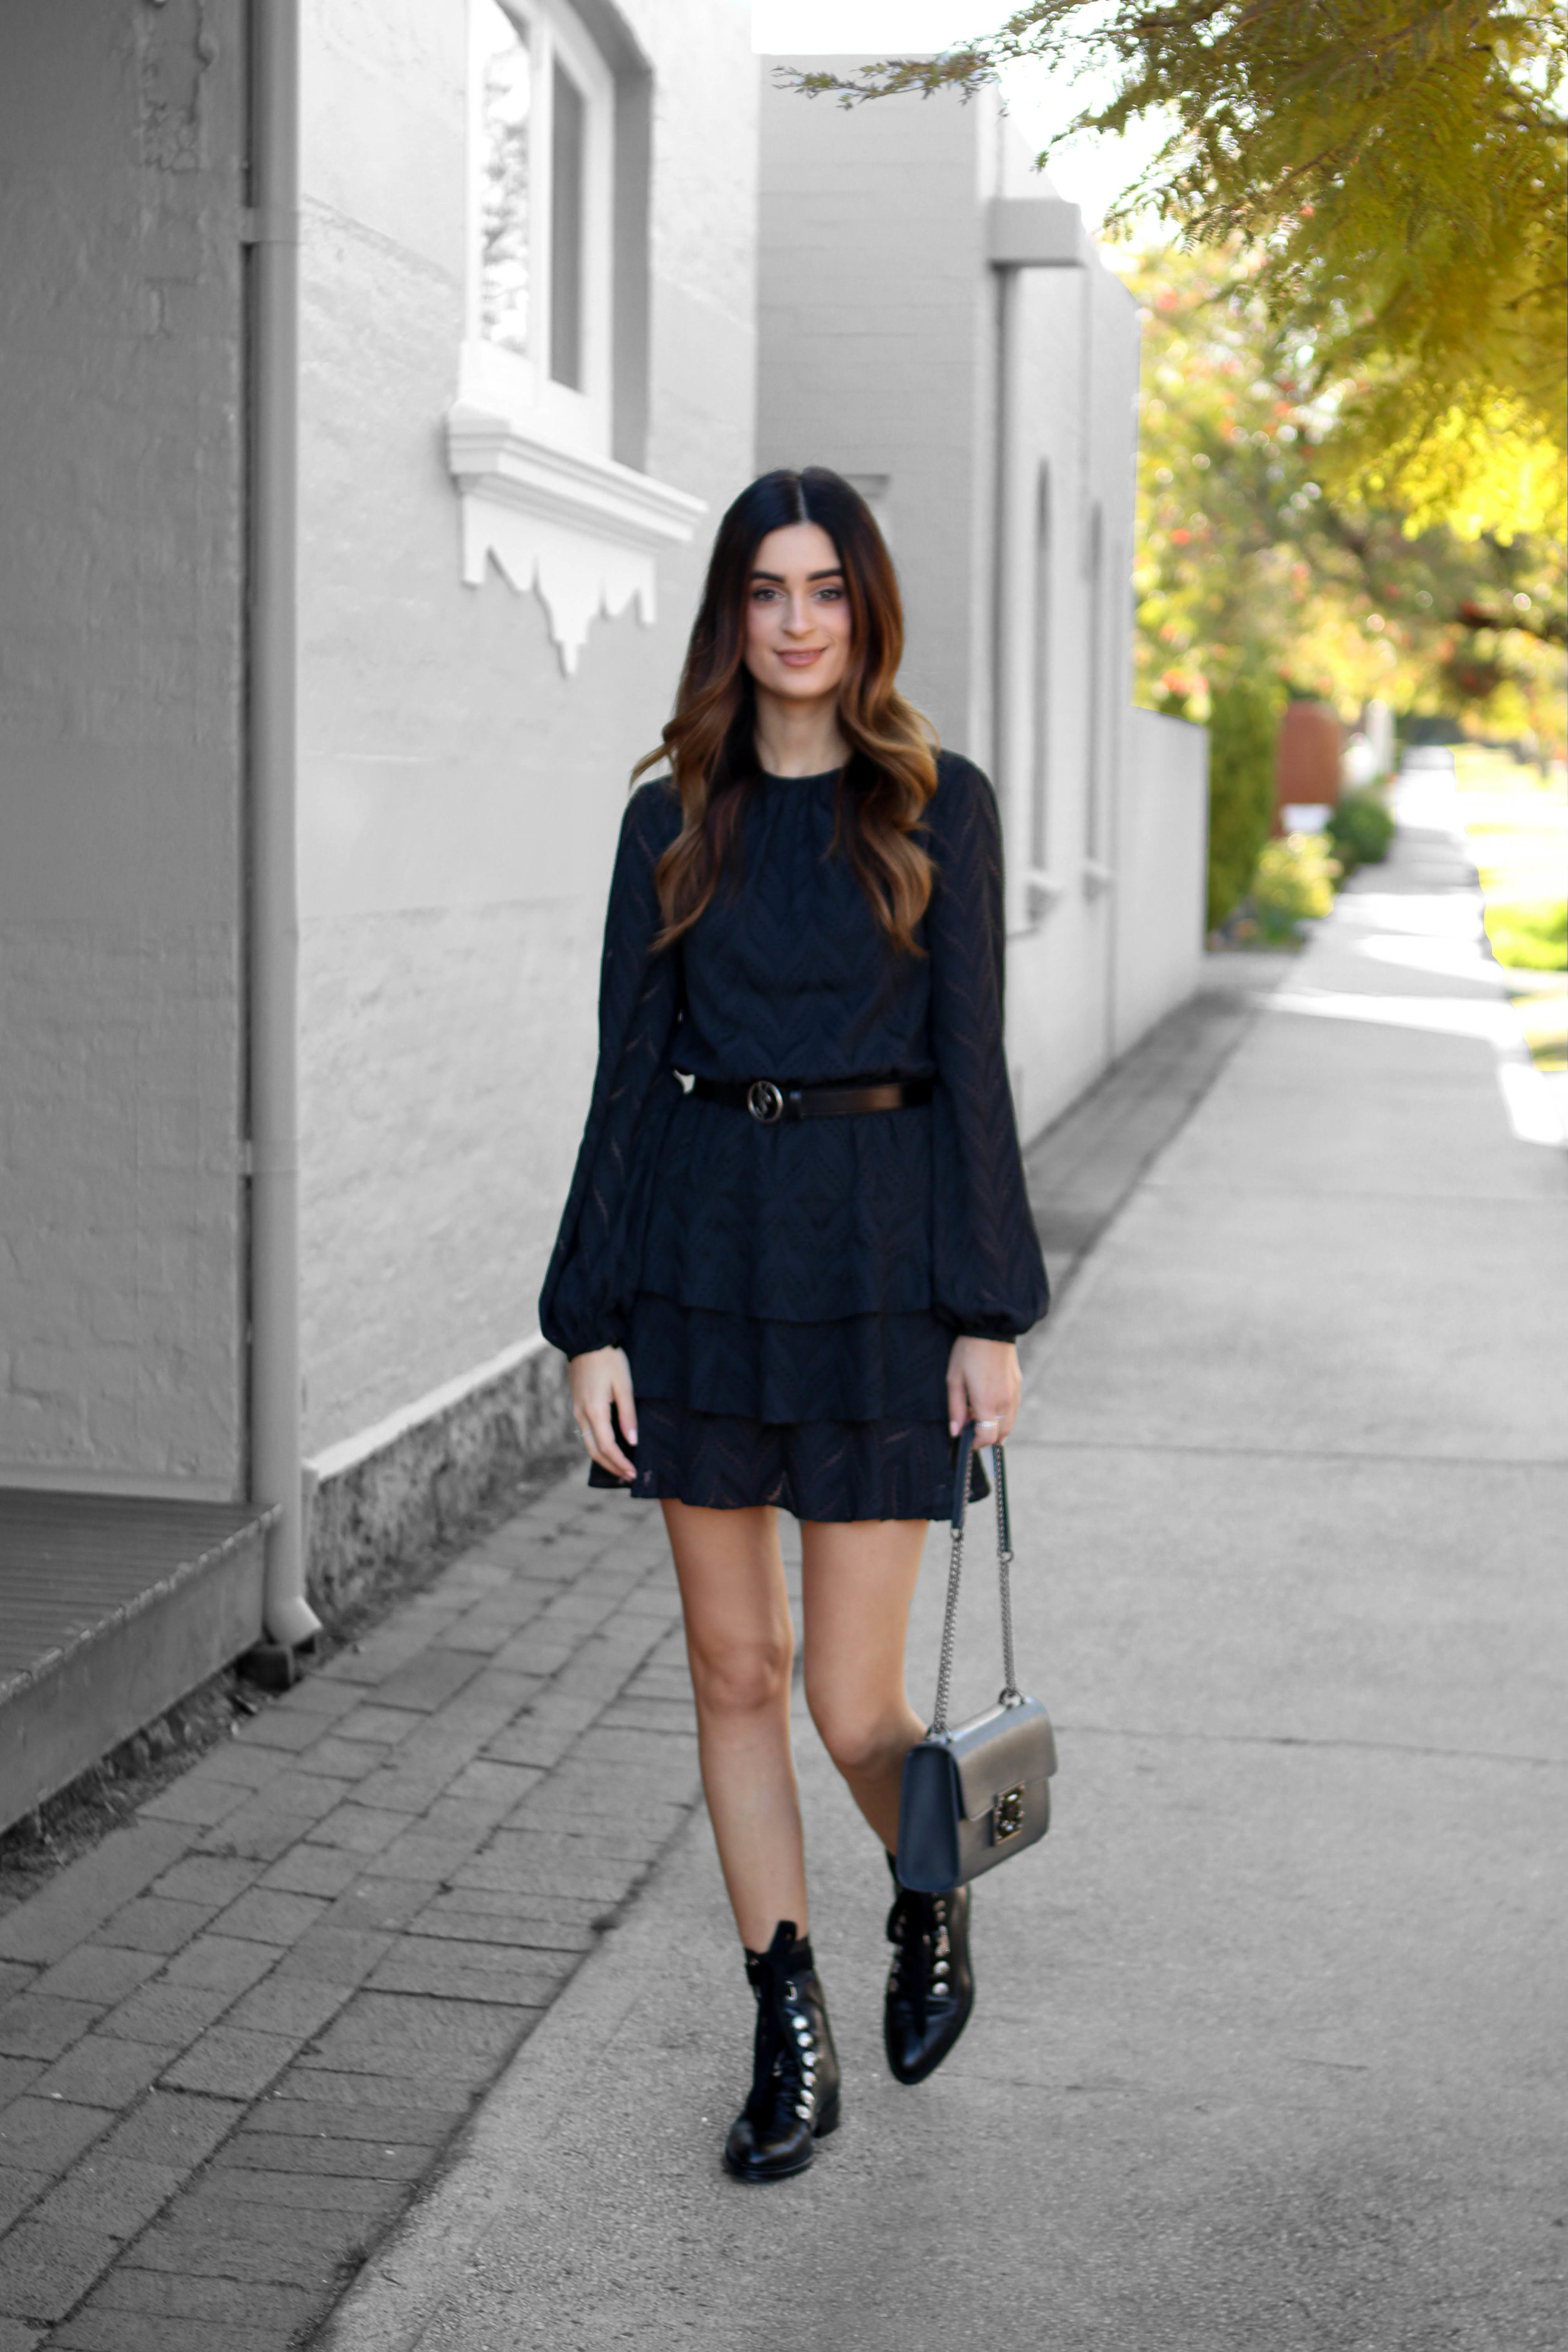 10 Outfits That Show Off Your Favorite Black Boots